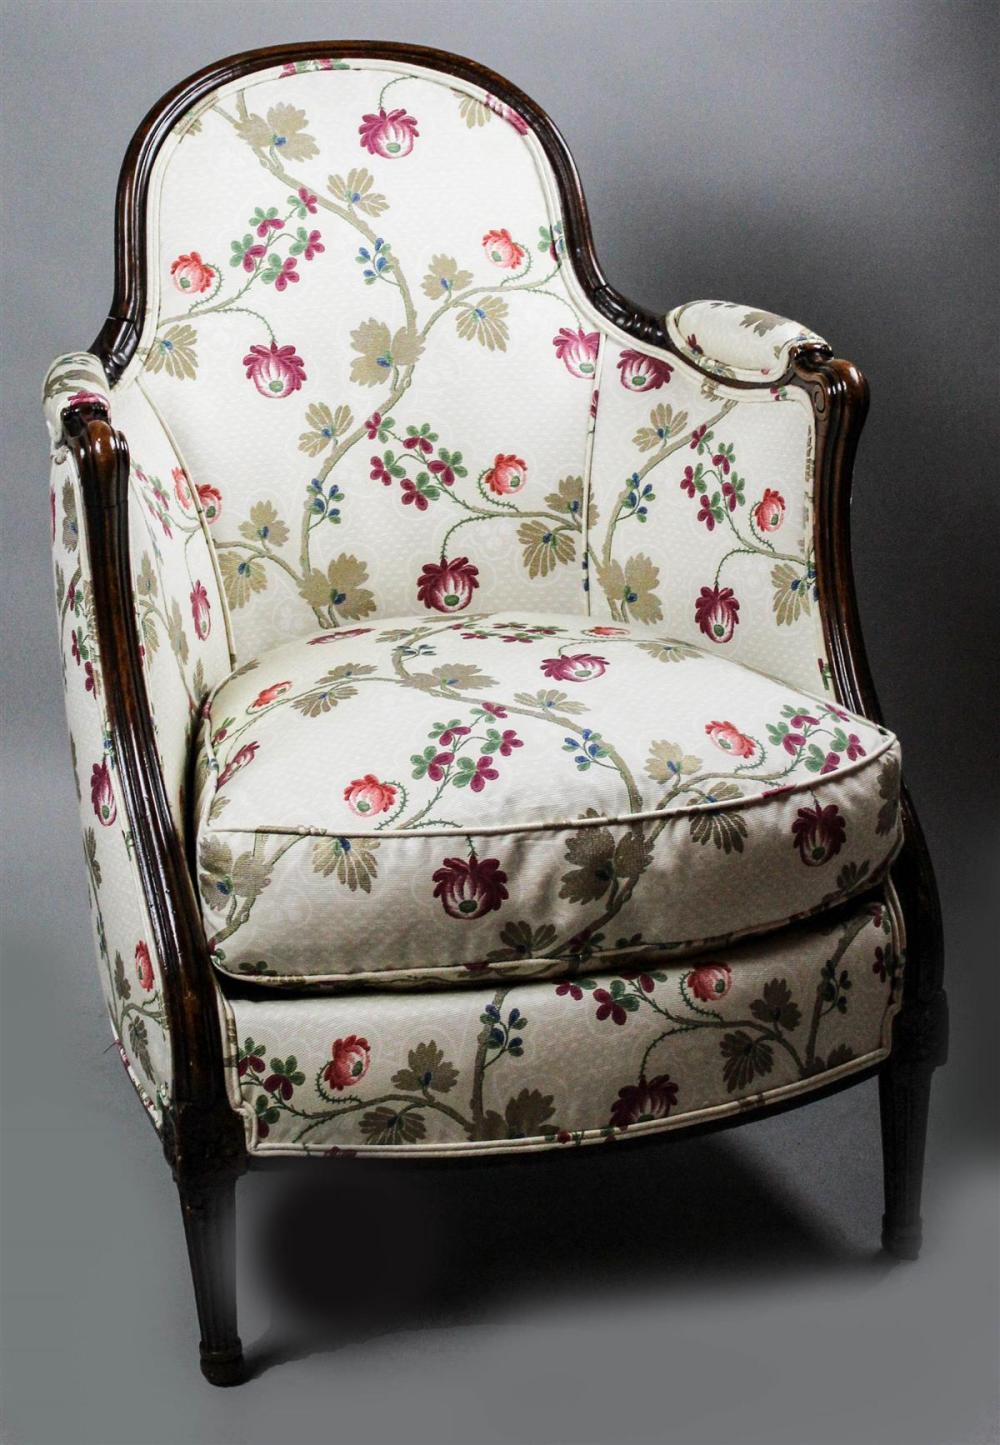 SMALL LOUIS XVI STYLE BERGERE WITH